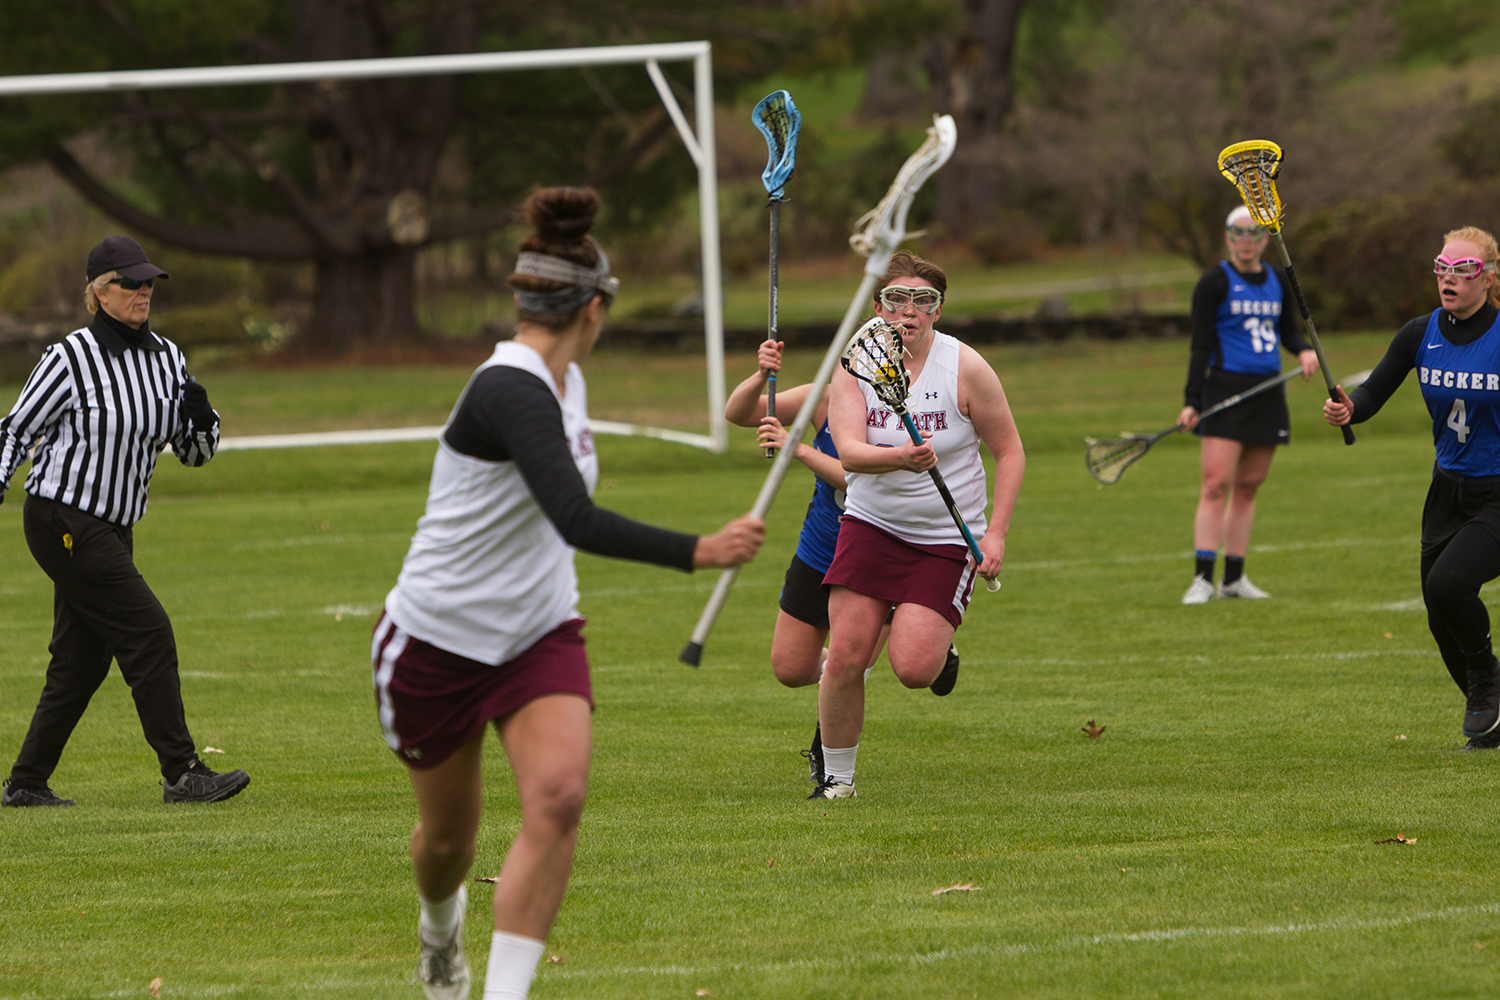 Wildcats Fall 18-8 to Mountaineers in NECC Women’s Lacrosse Match